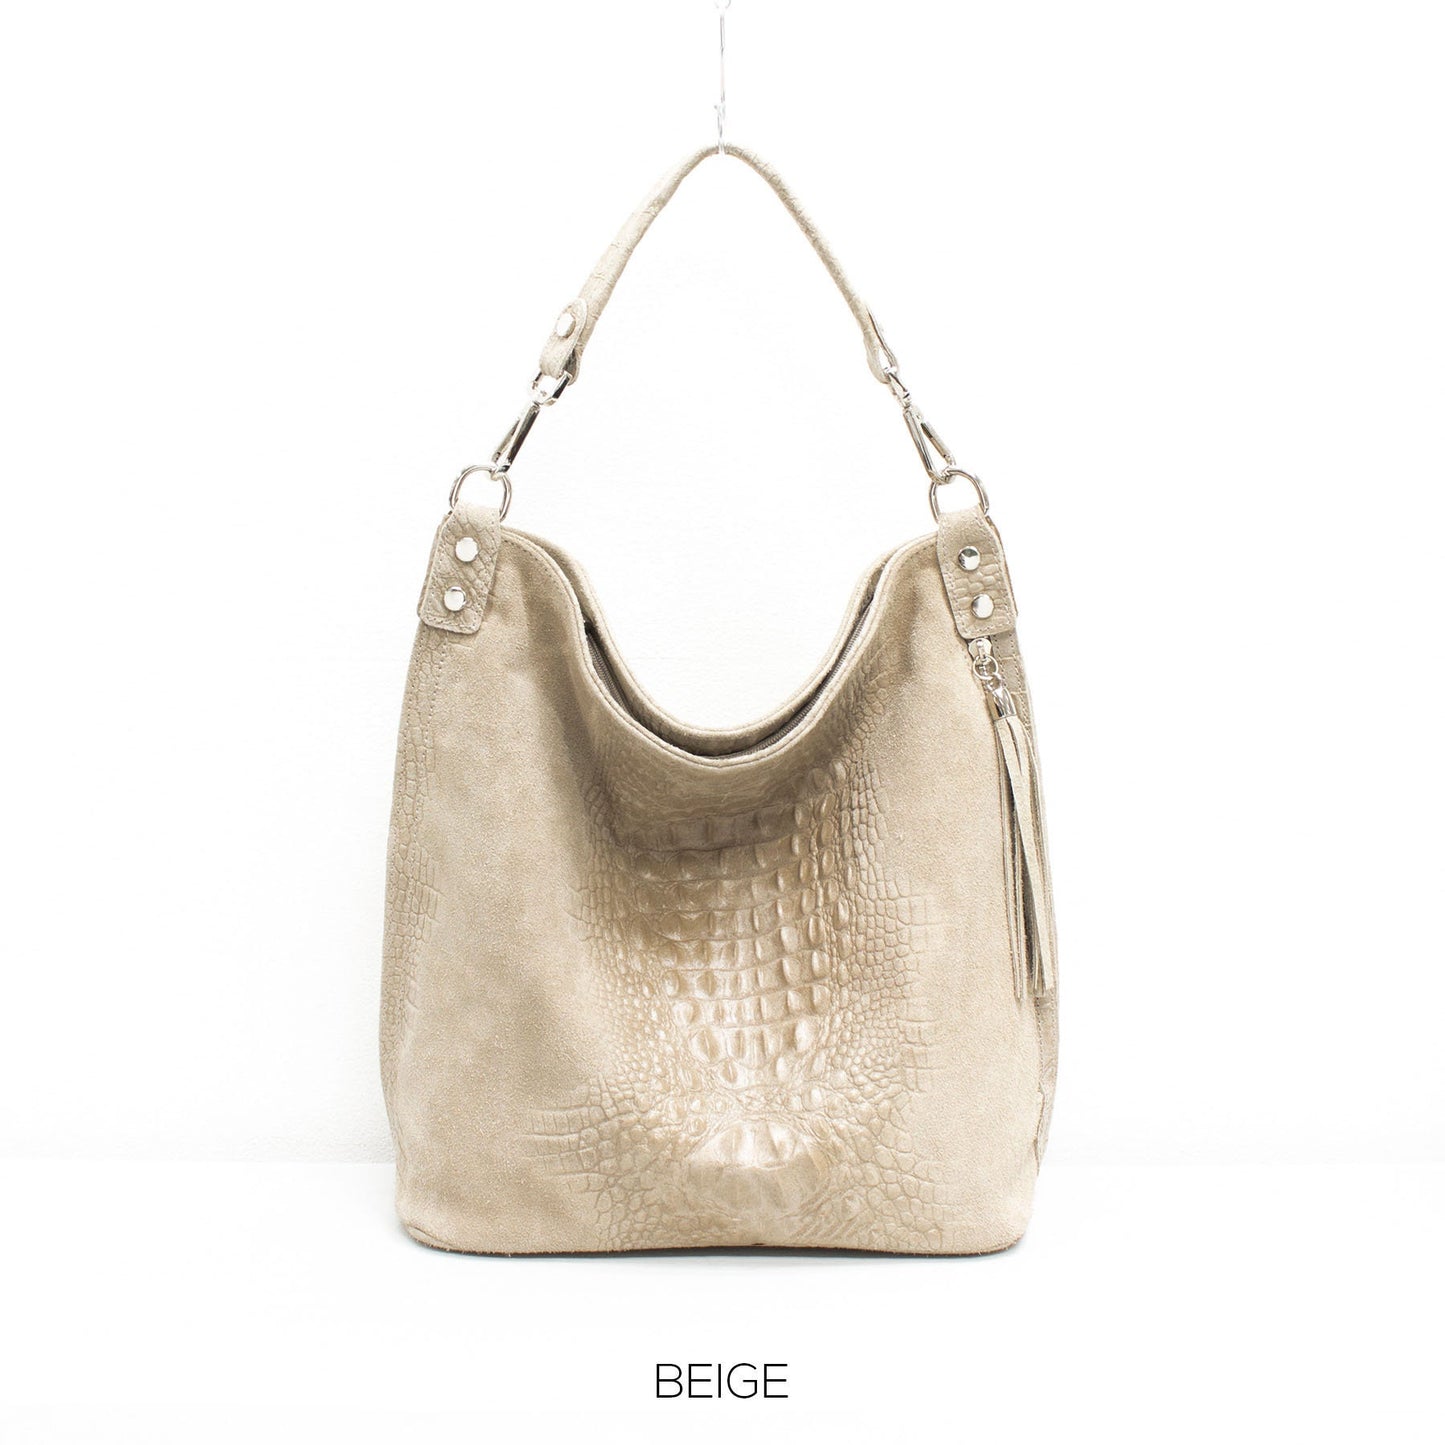 Genuine Real Suede Leather Croc Effect Hobo Bag